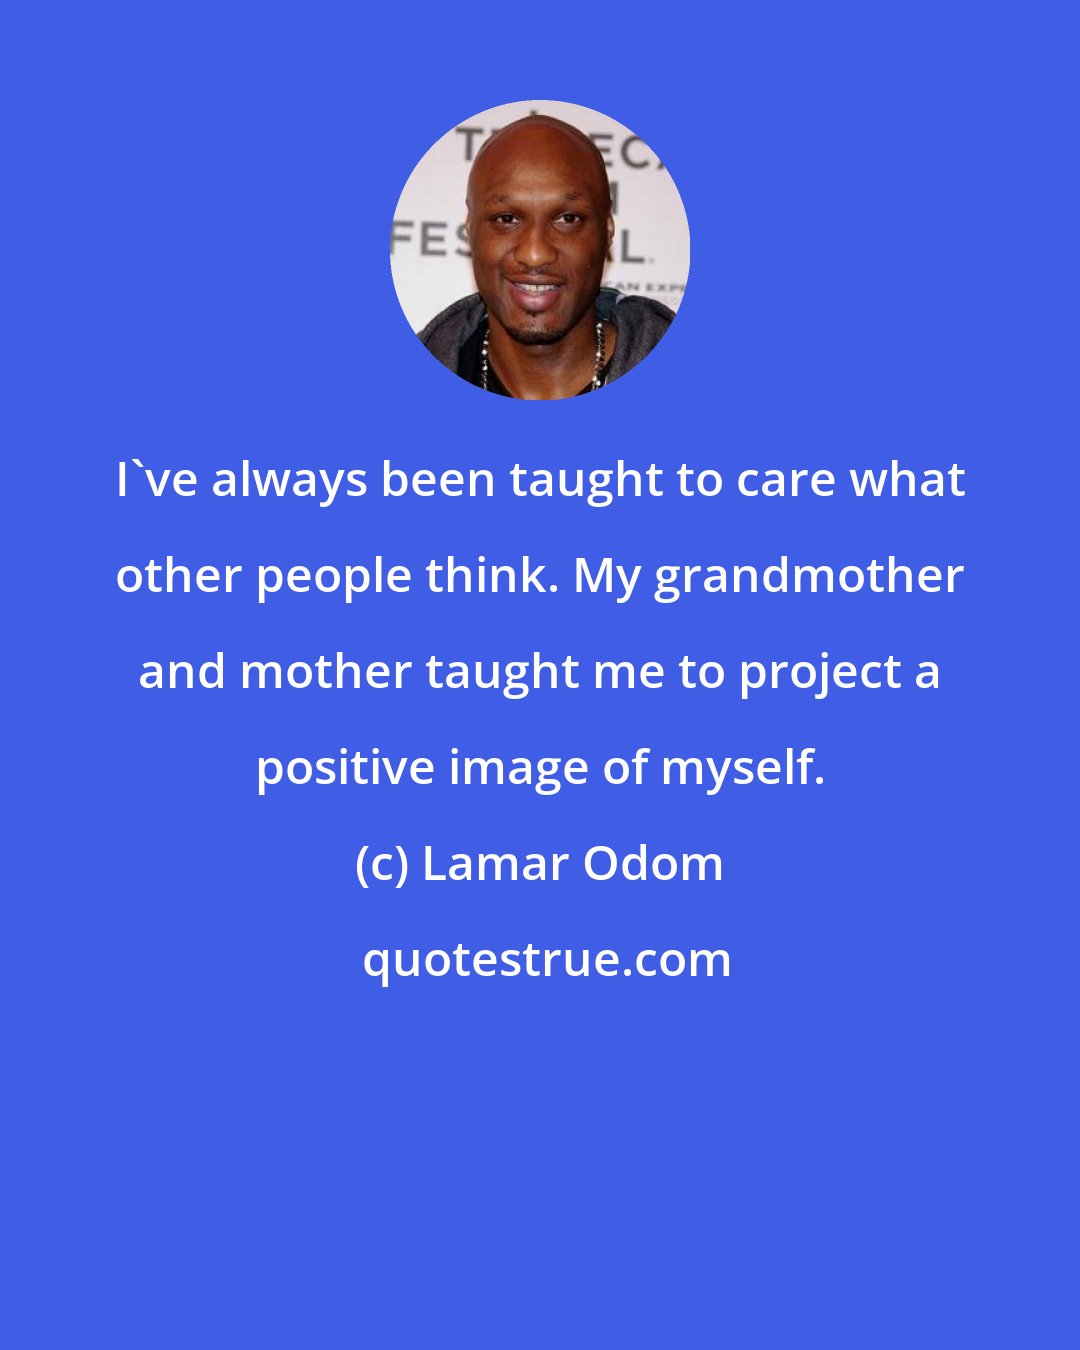 Lamar Odom: I've always been taught to care what other people think. My grandmother and mother taught me to project a positive image of myself.